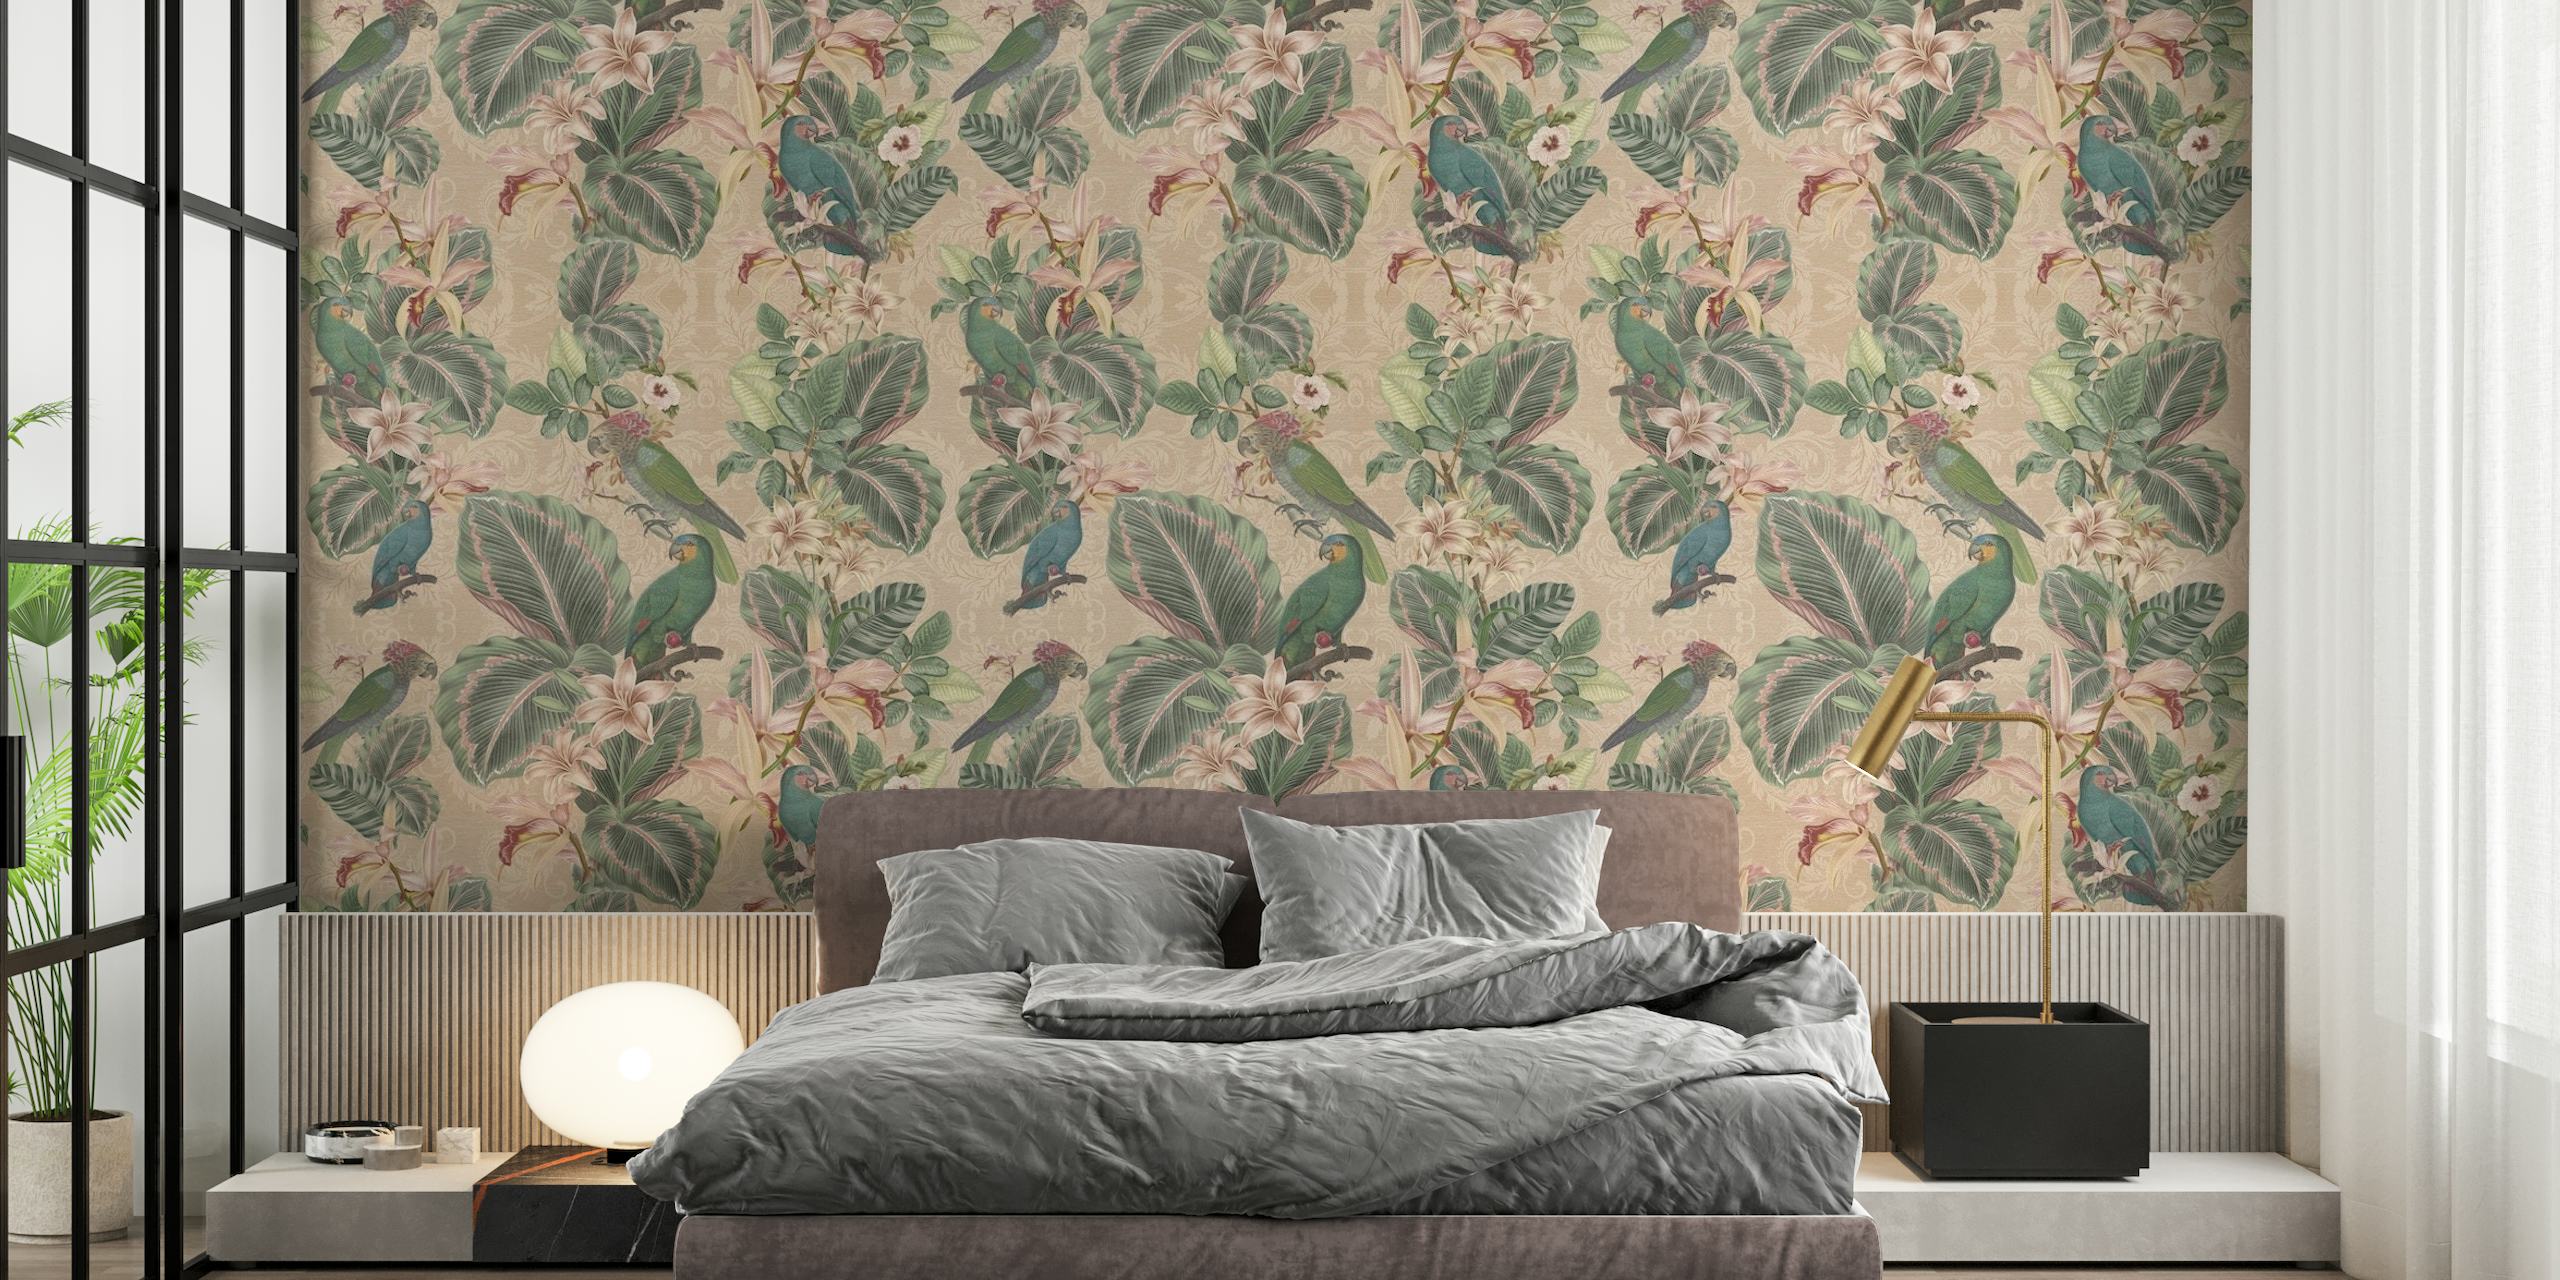 A wall mural showcasing vintage-style tropical parrot birds amidst lush foliage